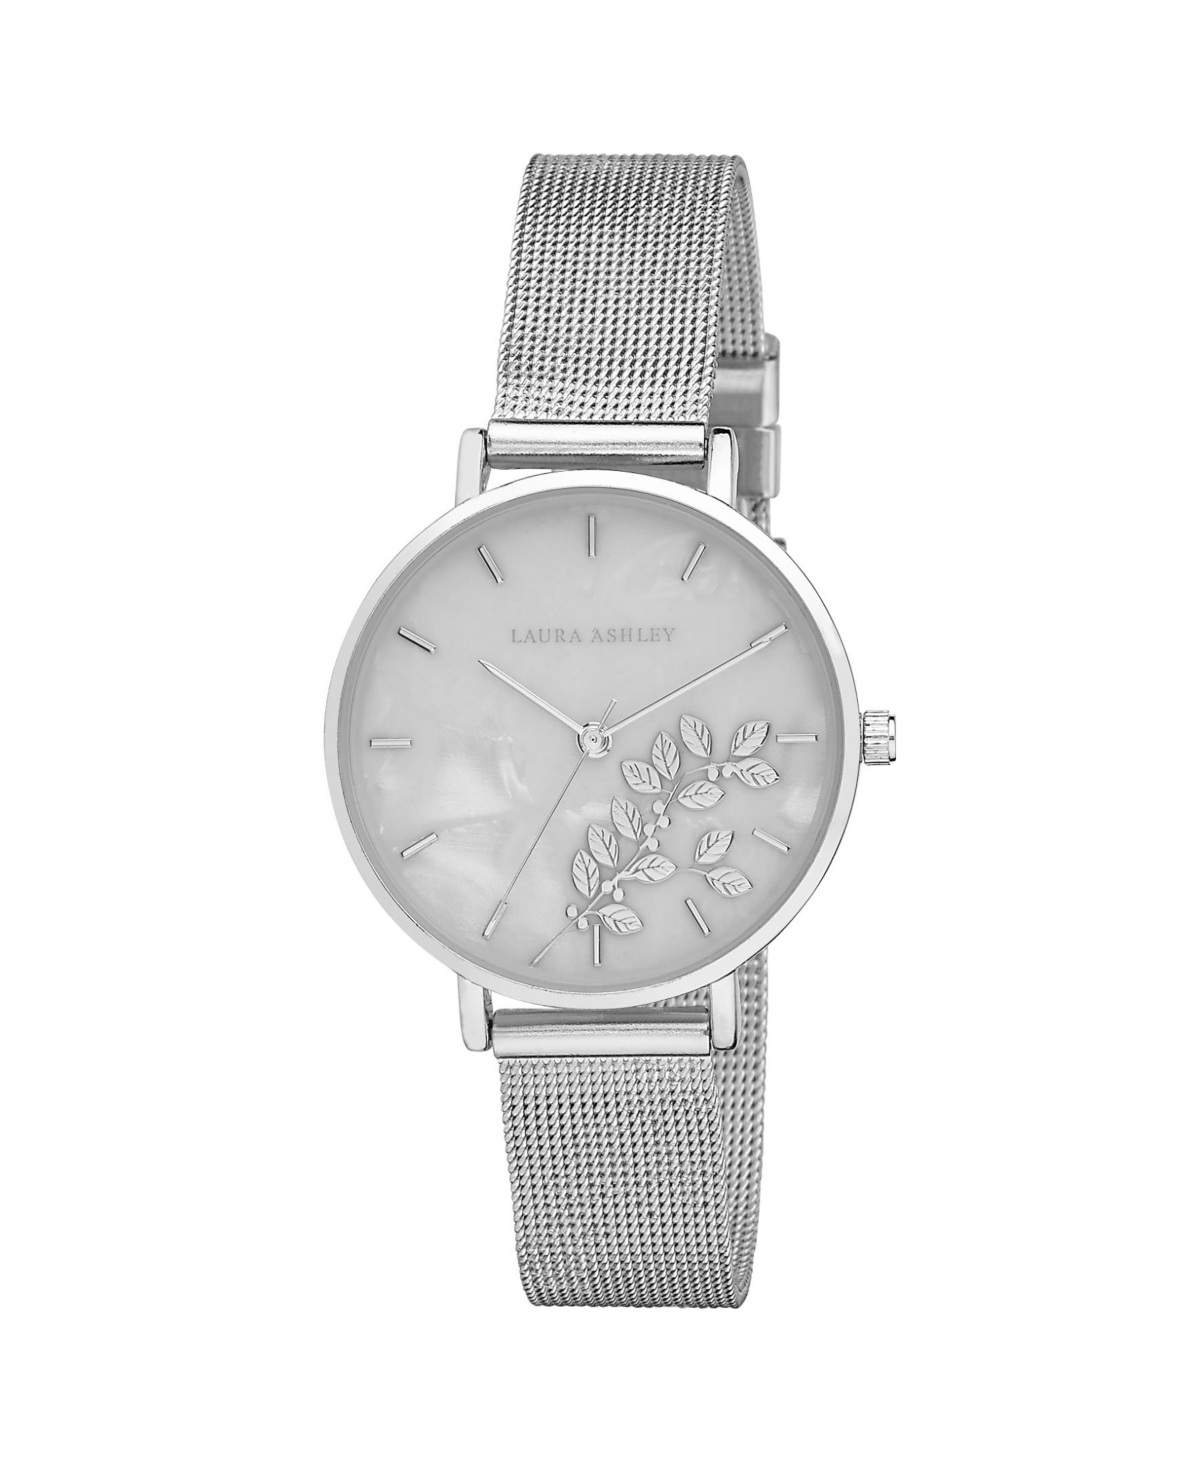 Women's Engraved Floral Printed Silver-Tone Alloy Mesh Band Watch 34mm - Sliver-Tone